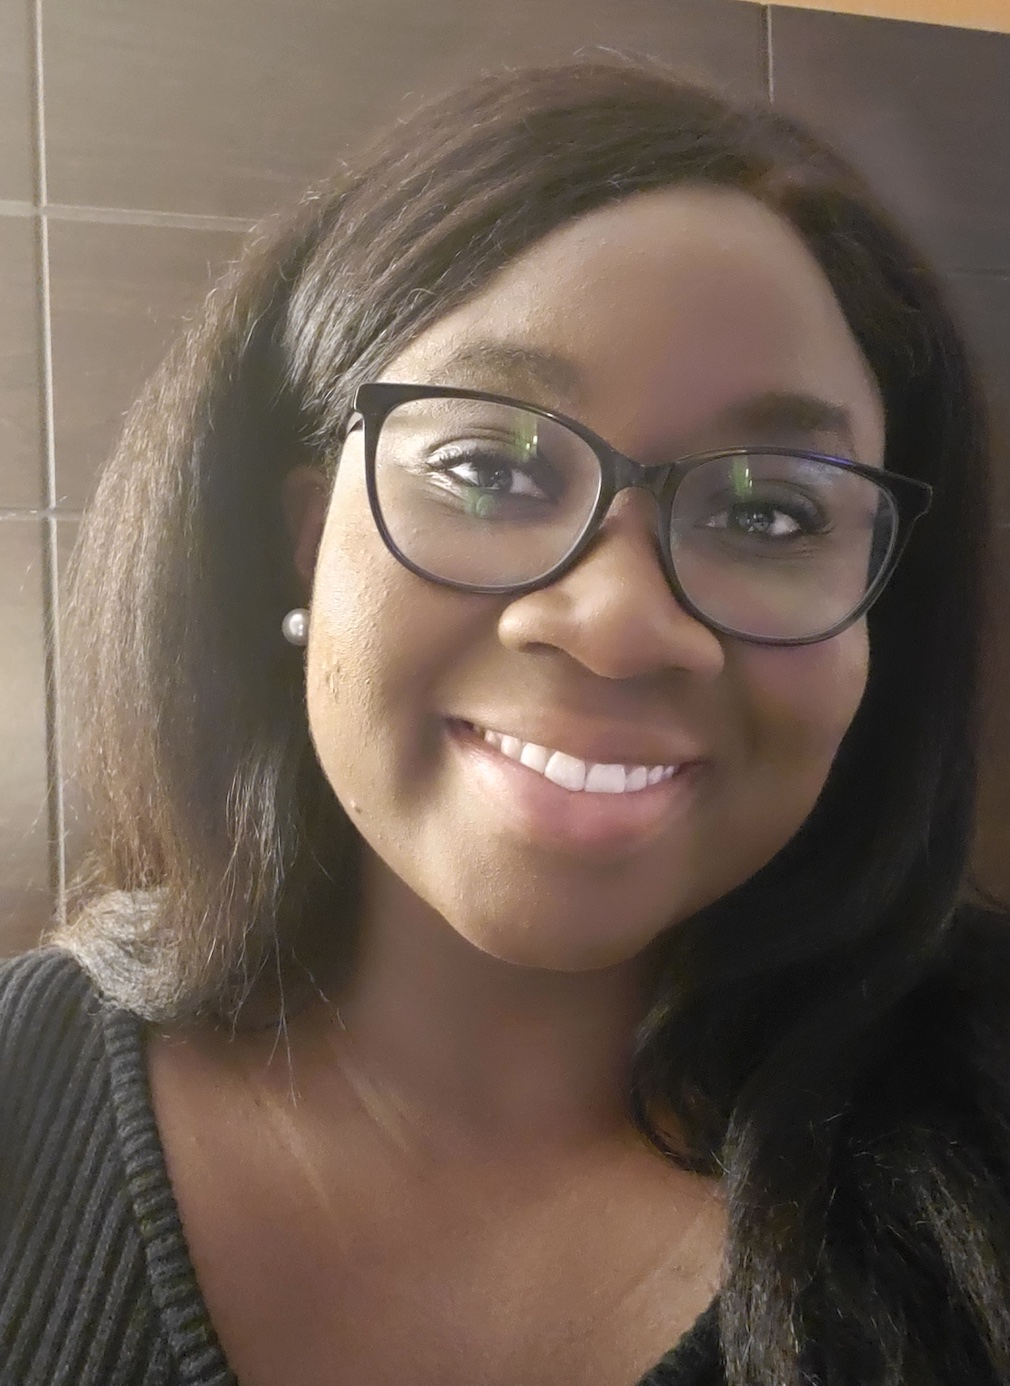 Stacey-Gbeklui-Registered-Behaviour-Technician-RBT-ABA-Therapy-Toronto-Behaviour-Board-Certified-Behavioural-Therapist-Autism-ABA-Therapy-Toronto-Side-by-Side-ABA-Therapy